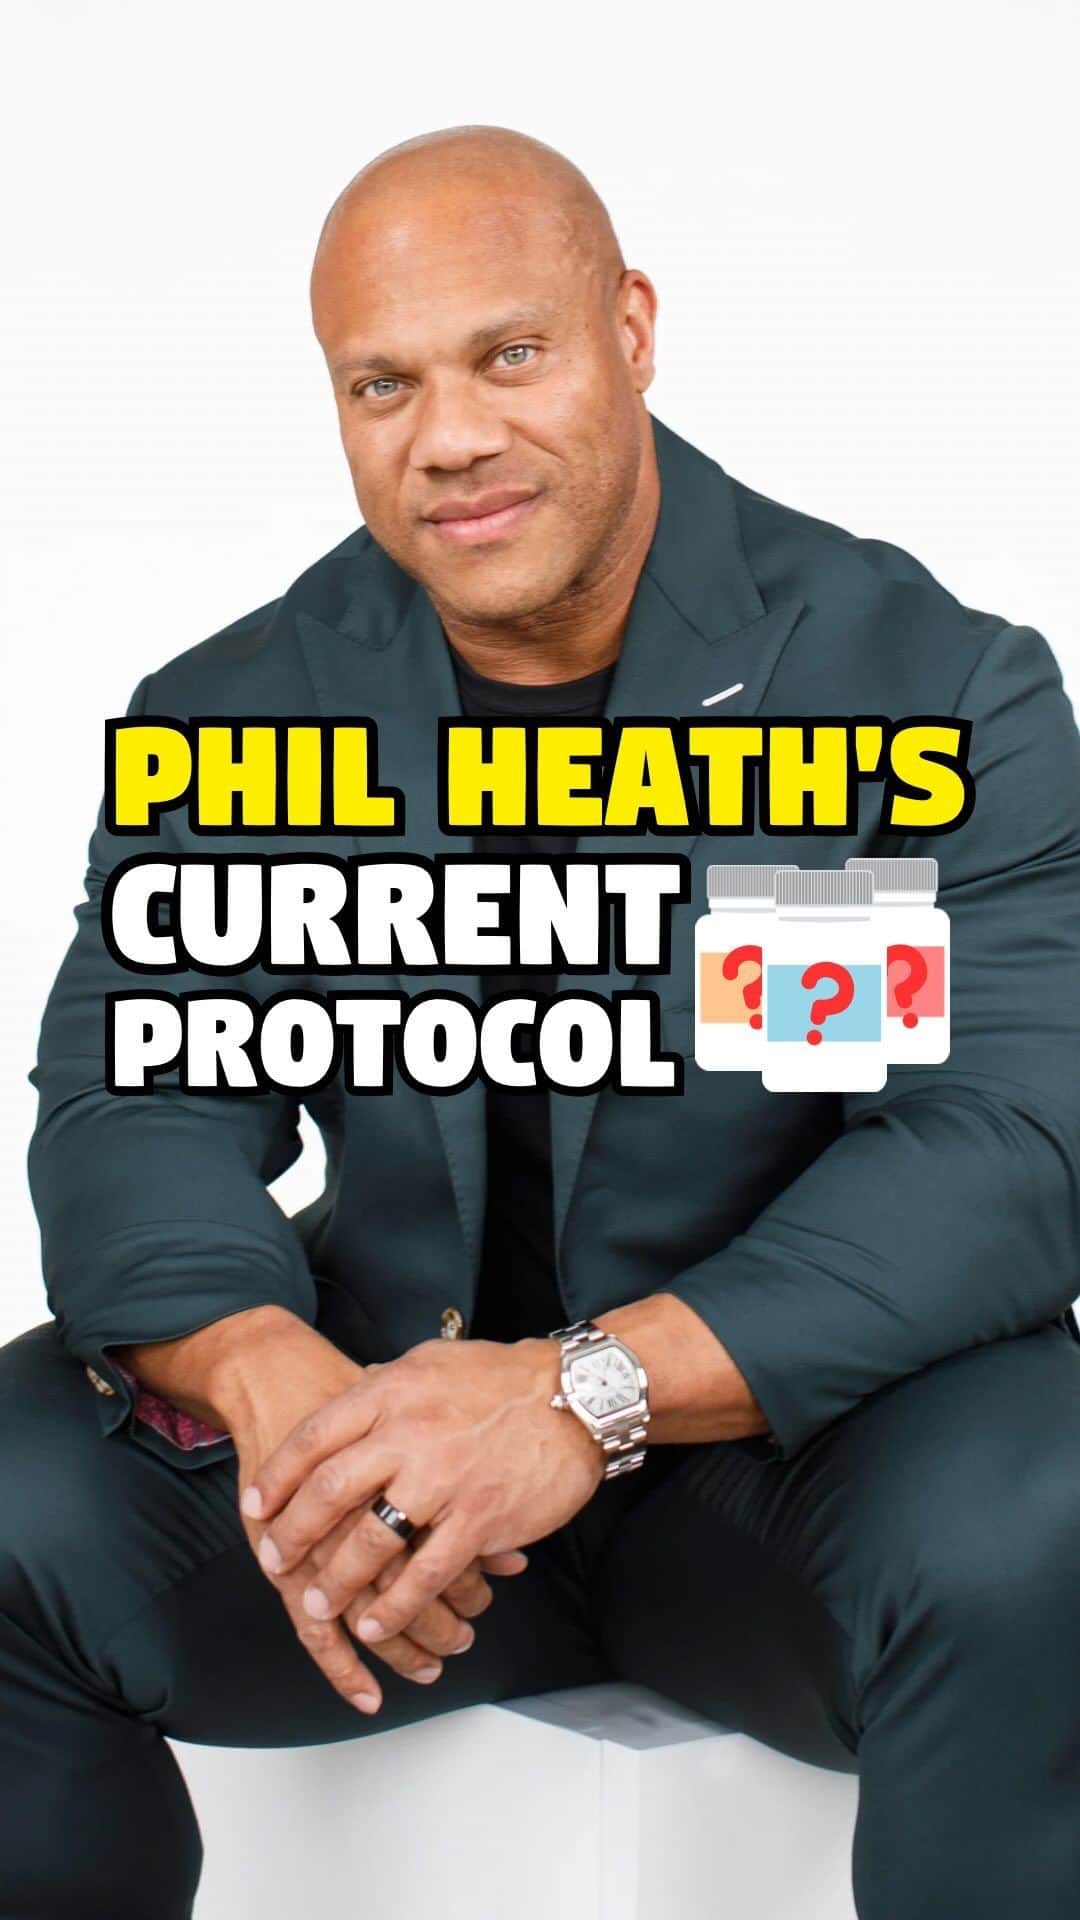 Phil Heathのインスタグラム：「“My protocol has definitely changed for the greater” 💯  🔗 Click The Link In our Bio  🗓️ Fill Out a Patient Intake Form⁣⁣ We’ll Help Find the Right Treatment Options!  🇺🇸 Veteran Owned & Operated⁣  Disclaimer: Any content posted on this Instagram account is for entertainment, educational and knowledge purposes only and is not intended as medical advice. We always recommend consulting with our team of licensed healthcare providers before making any changes to your wellness or medical routine. Our content is intended to promote wellness and healthy approaches to lifestyle choices. By viewing and engaging with our Instagram content, you agree to this disclaimer.  #fitnessjourney #fitnesslifestyle #fitnessgoals #fitnessinspiration #fitnessaddicted #fitnesstips #fitnessgoal #transcend #wellnessfriday #wellnessjourney #fridaymotivation #wellnessfitness #wellnesslife #hrt #hormonereplacementtherapy #hormonetherapy #fitnesscommunity #peptidetherapy #philheath #mrolympia #transcendhrt #transcendcompany #weightloss #weightlosstransformation #weightlossgoals」